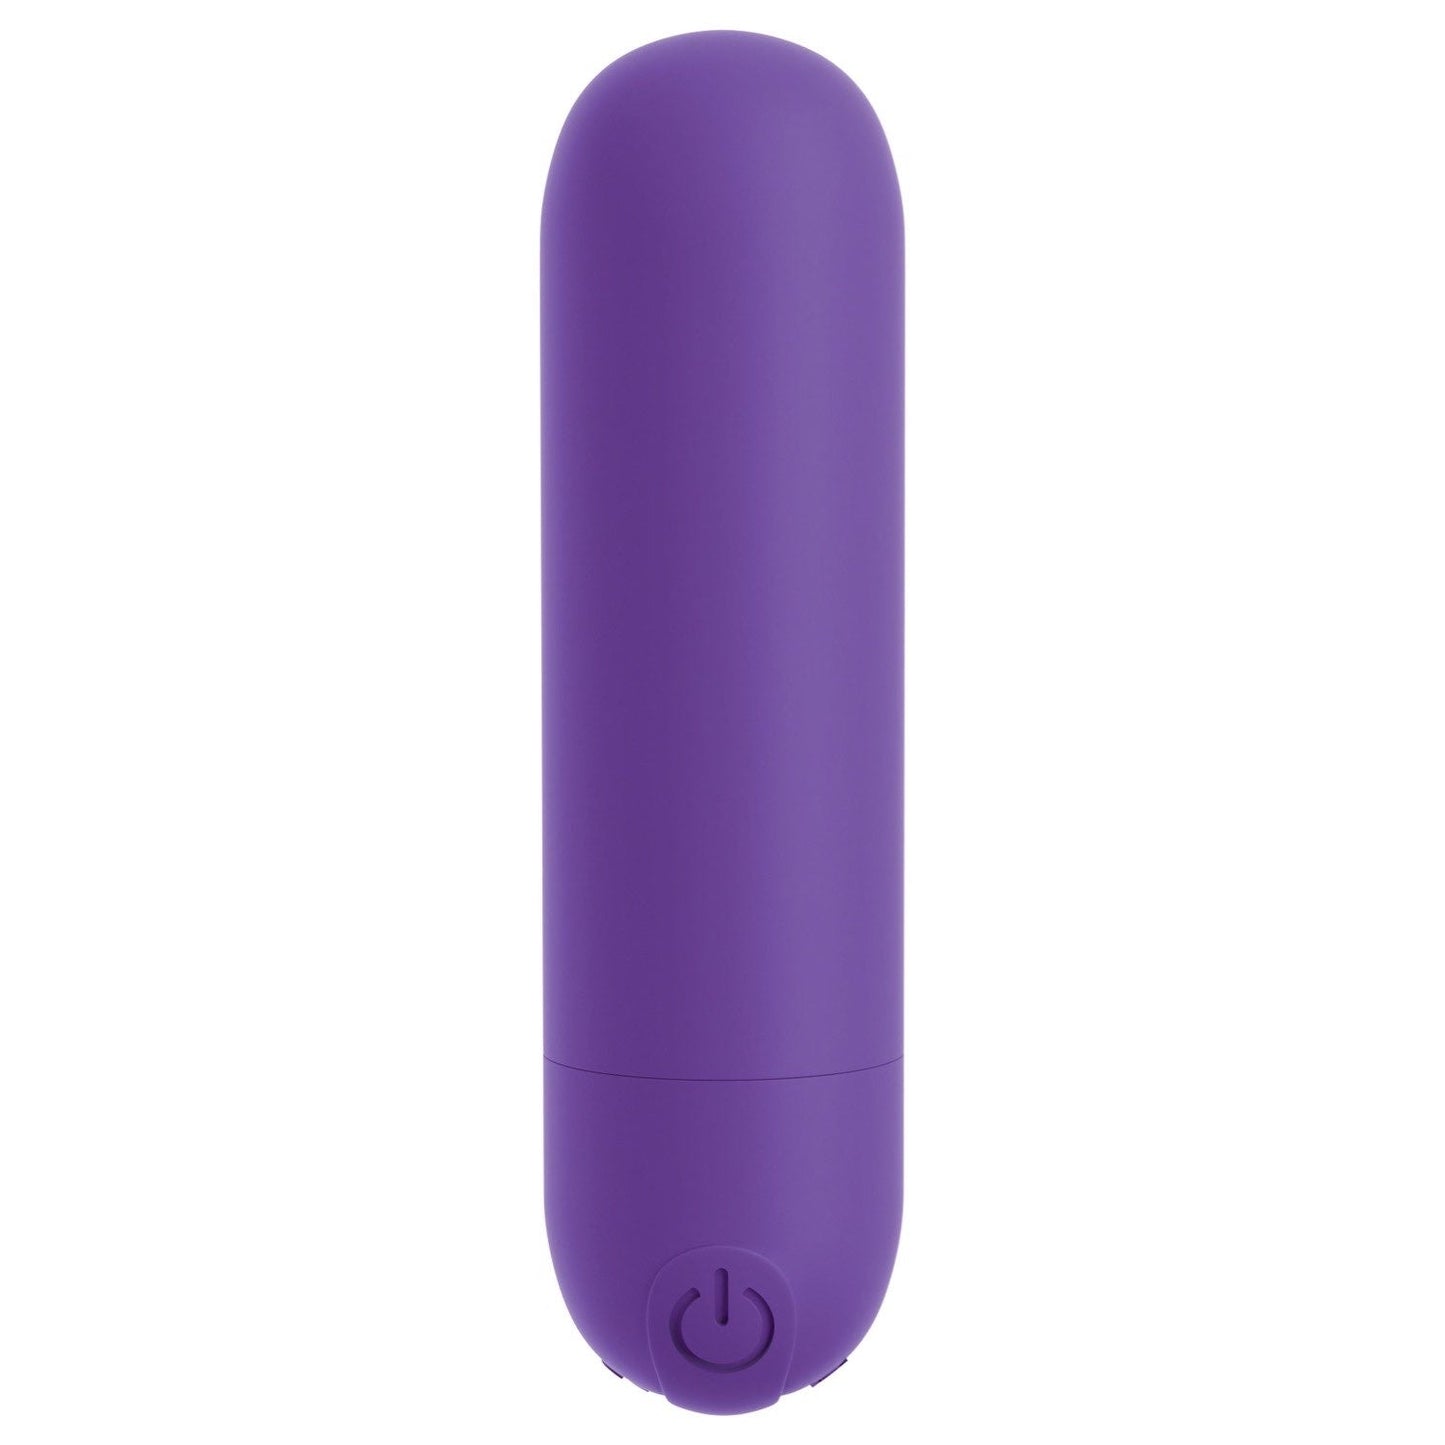 OMG! Bullets #Play - Purple USB Rechargeable Bullet